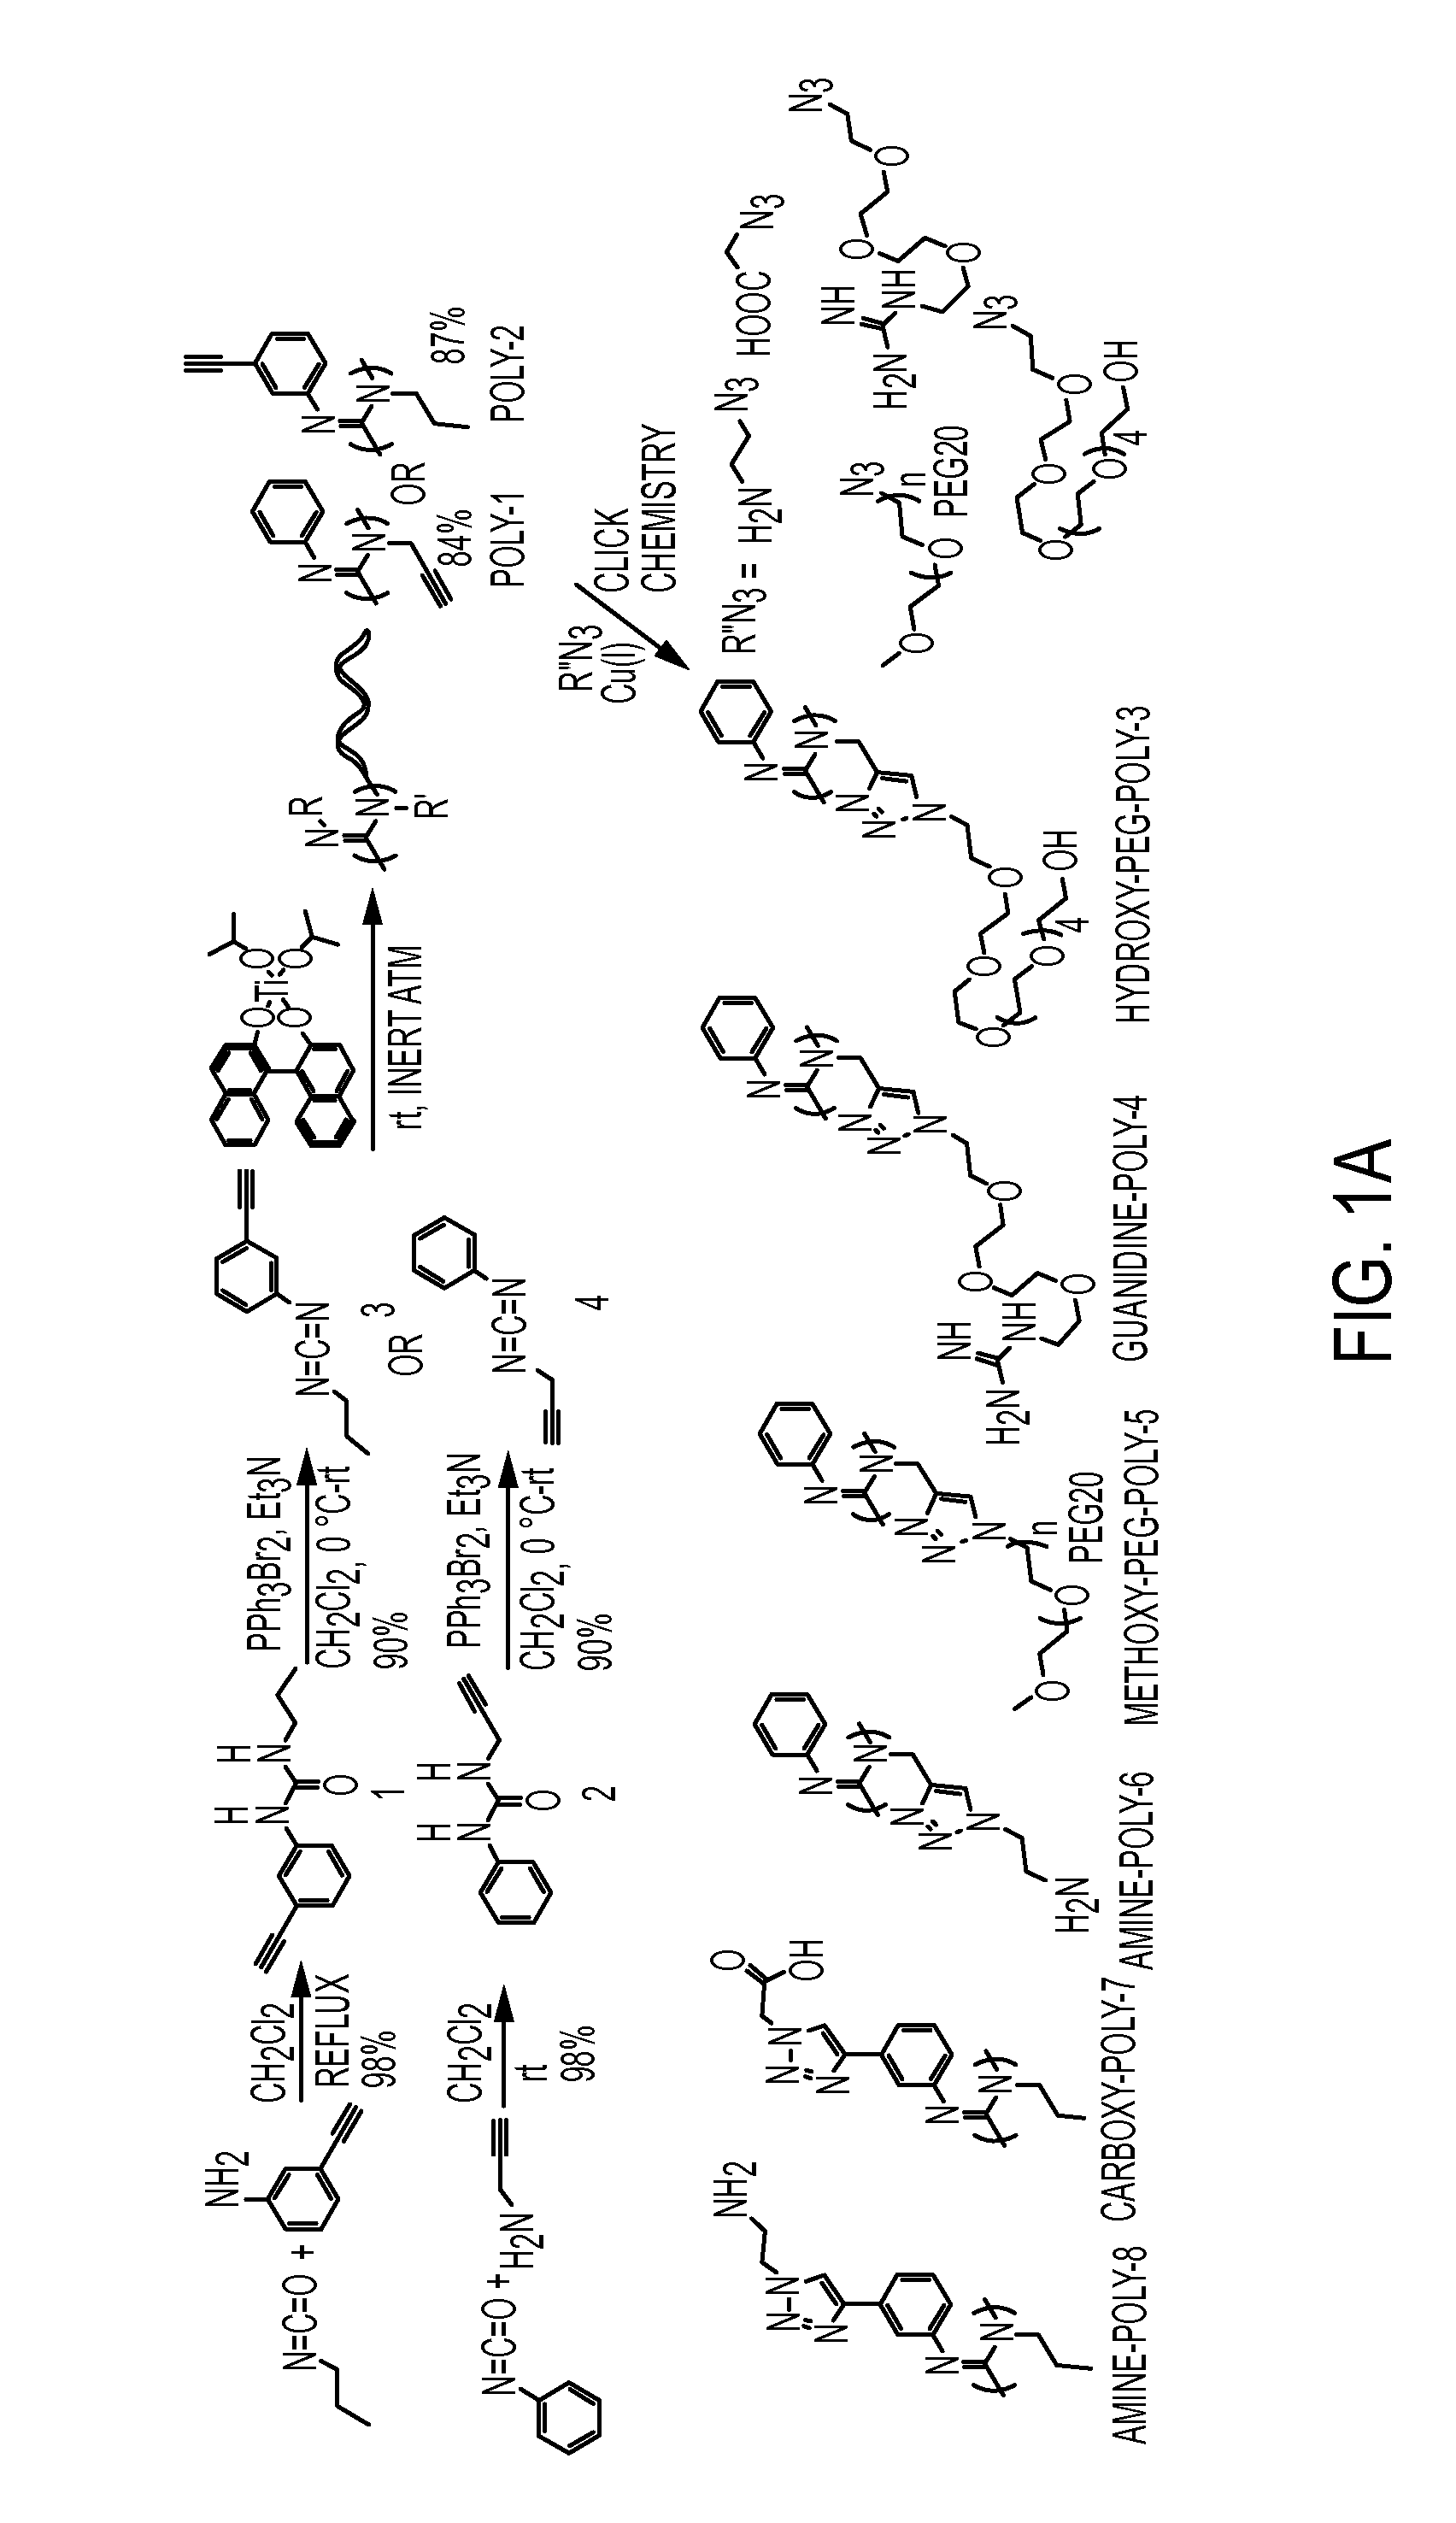 Helical polycarbodiimide polymers and associated imaging, diagnostic, and therapeutic methods